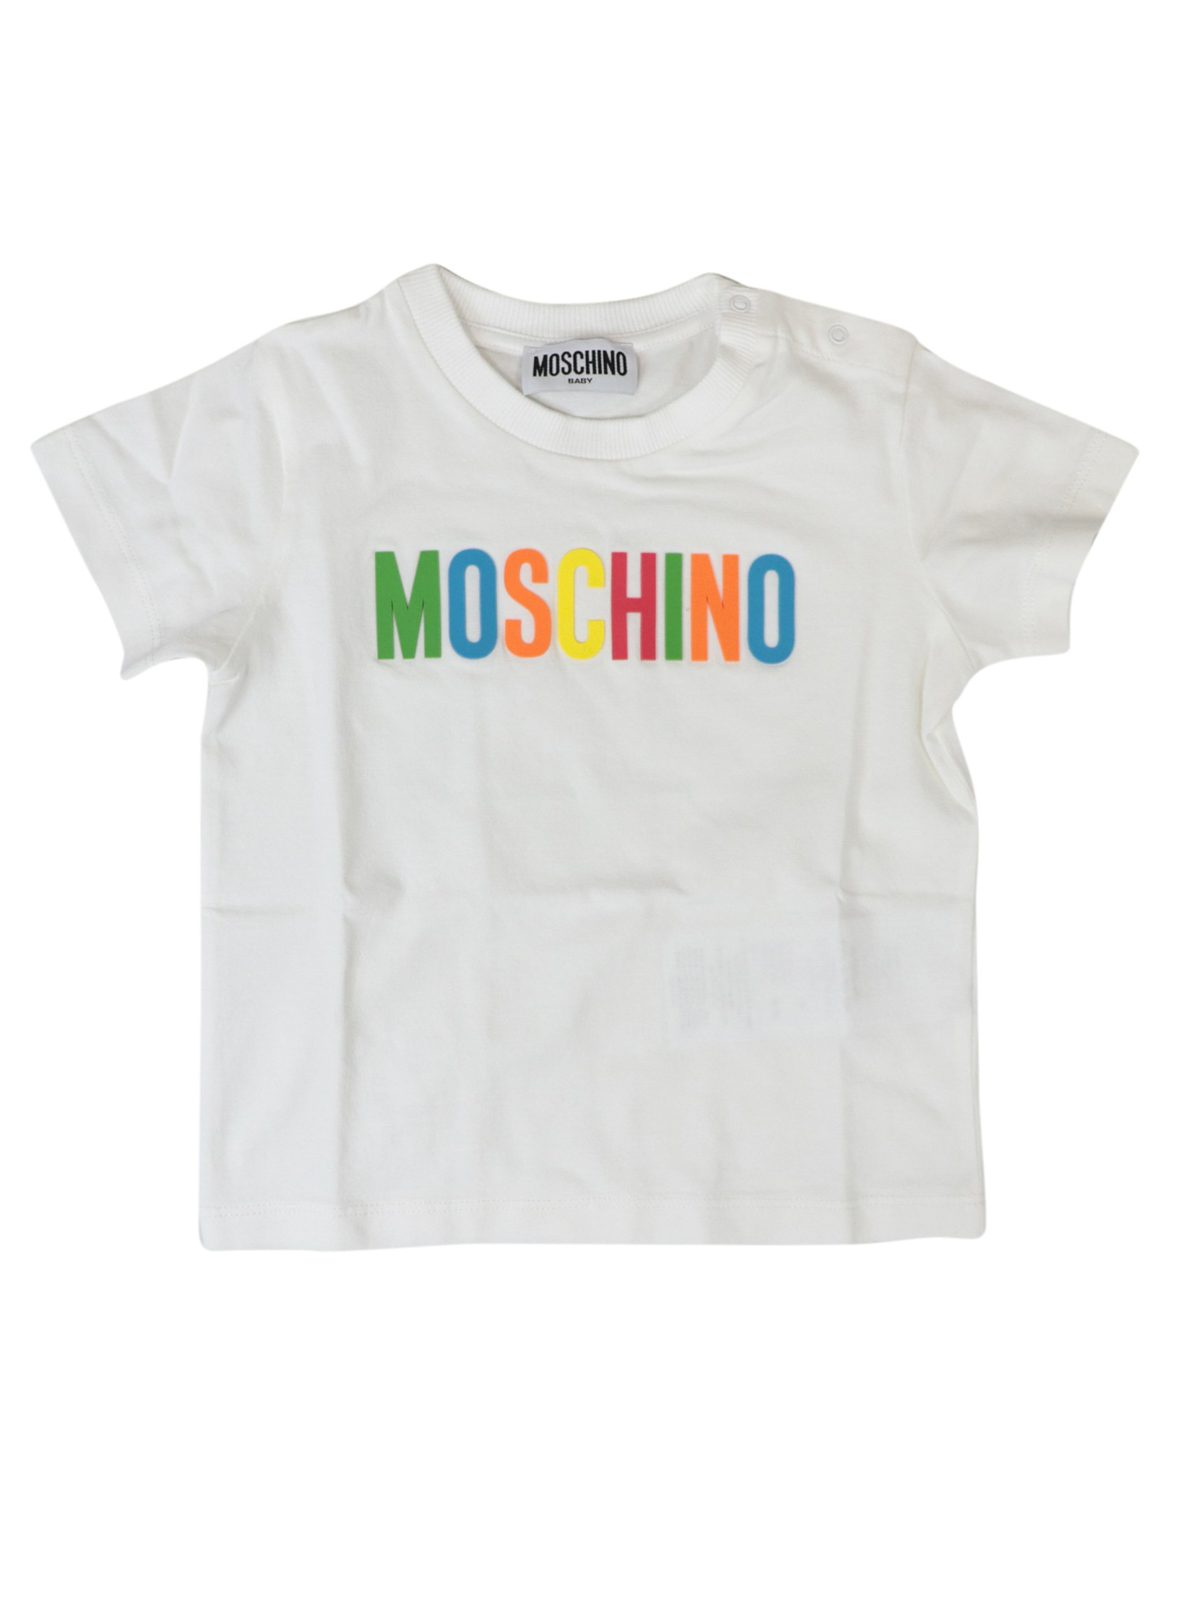 Jumpsuits Moschino Kids - Multi-coloured logo T-shirt and leggings